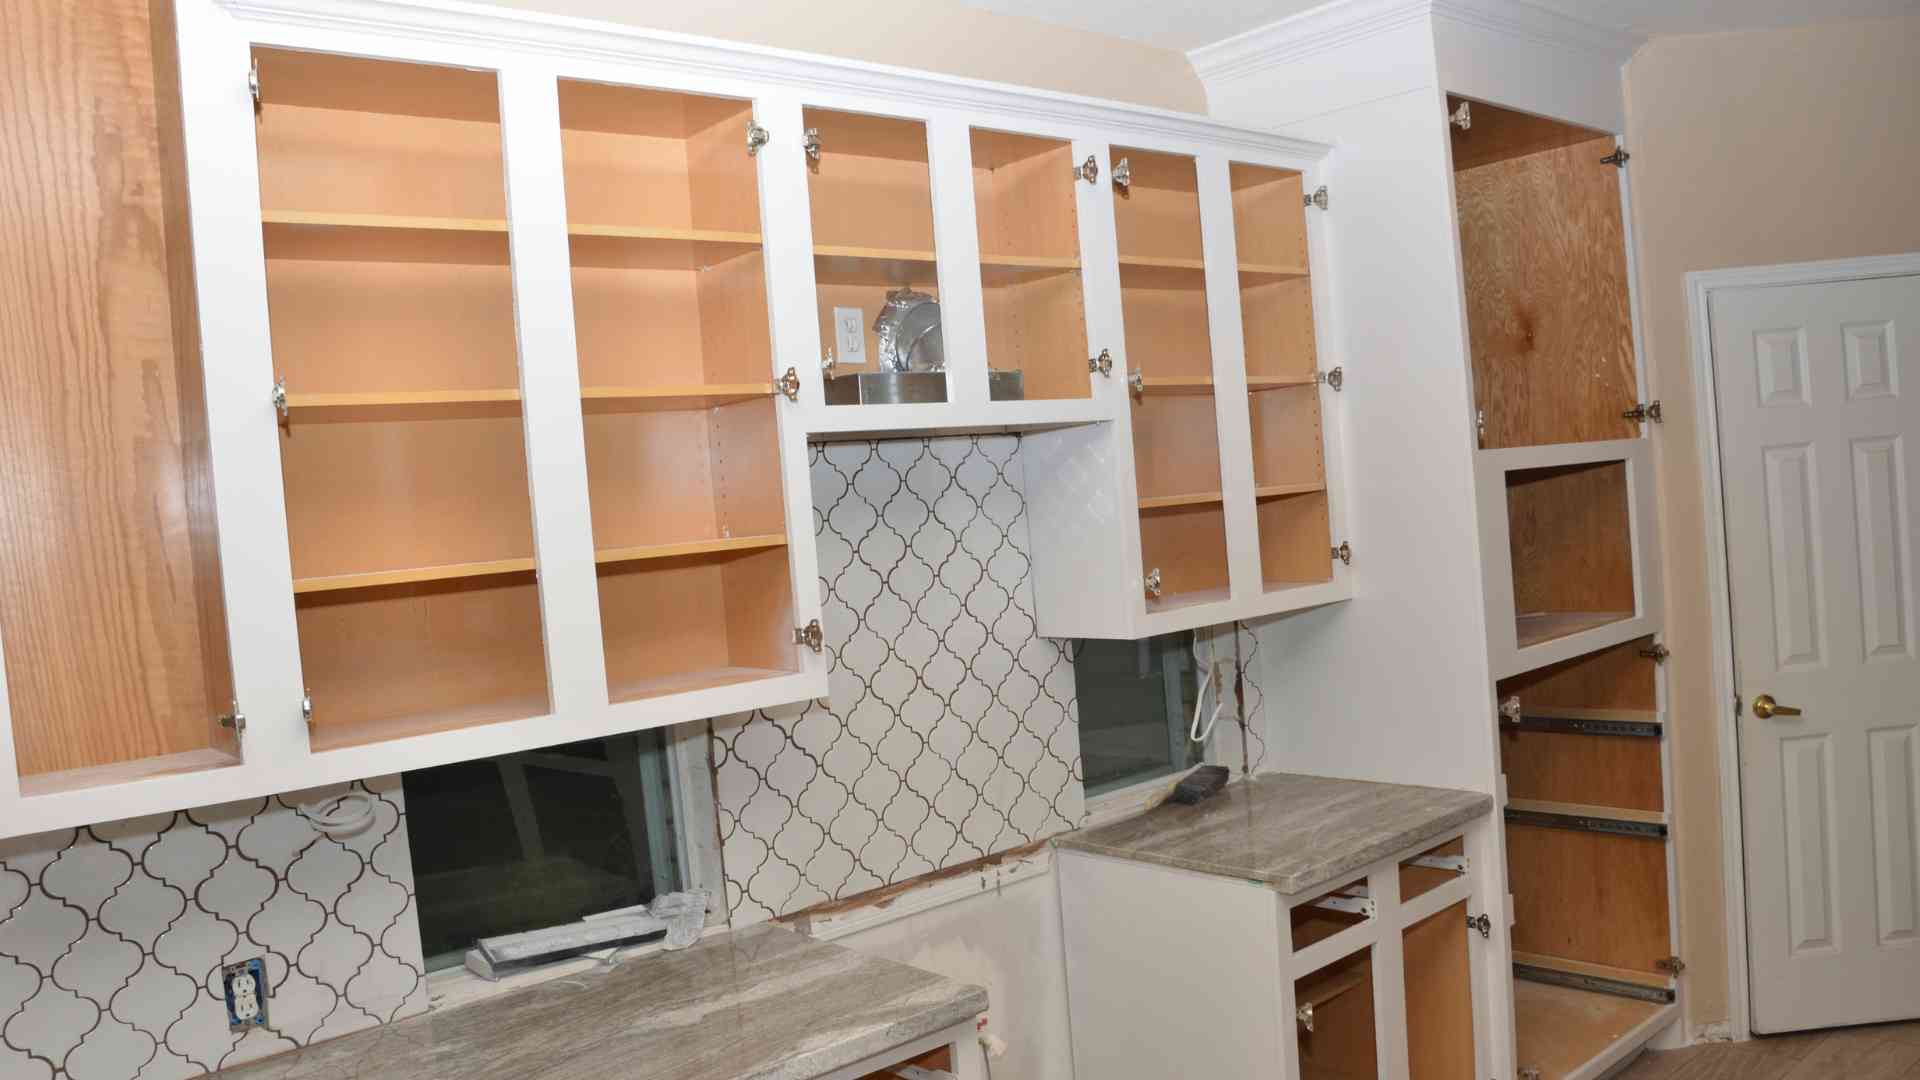 A Comprehensive Guide to Choosing the Right Cabinet Painting Techniques